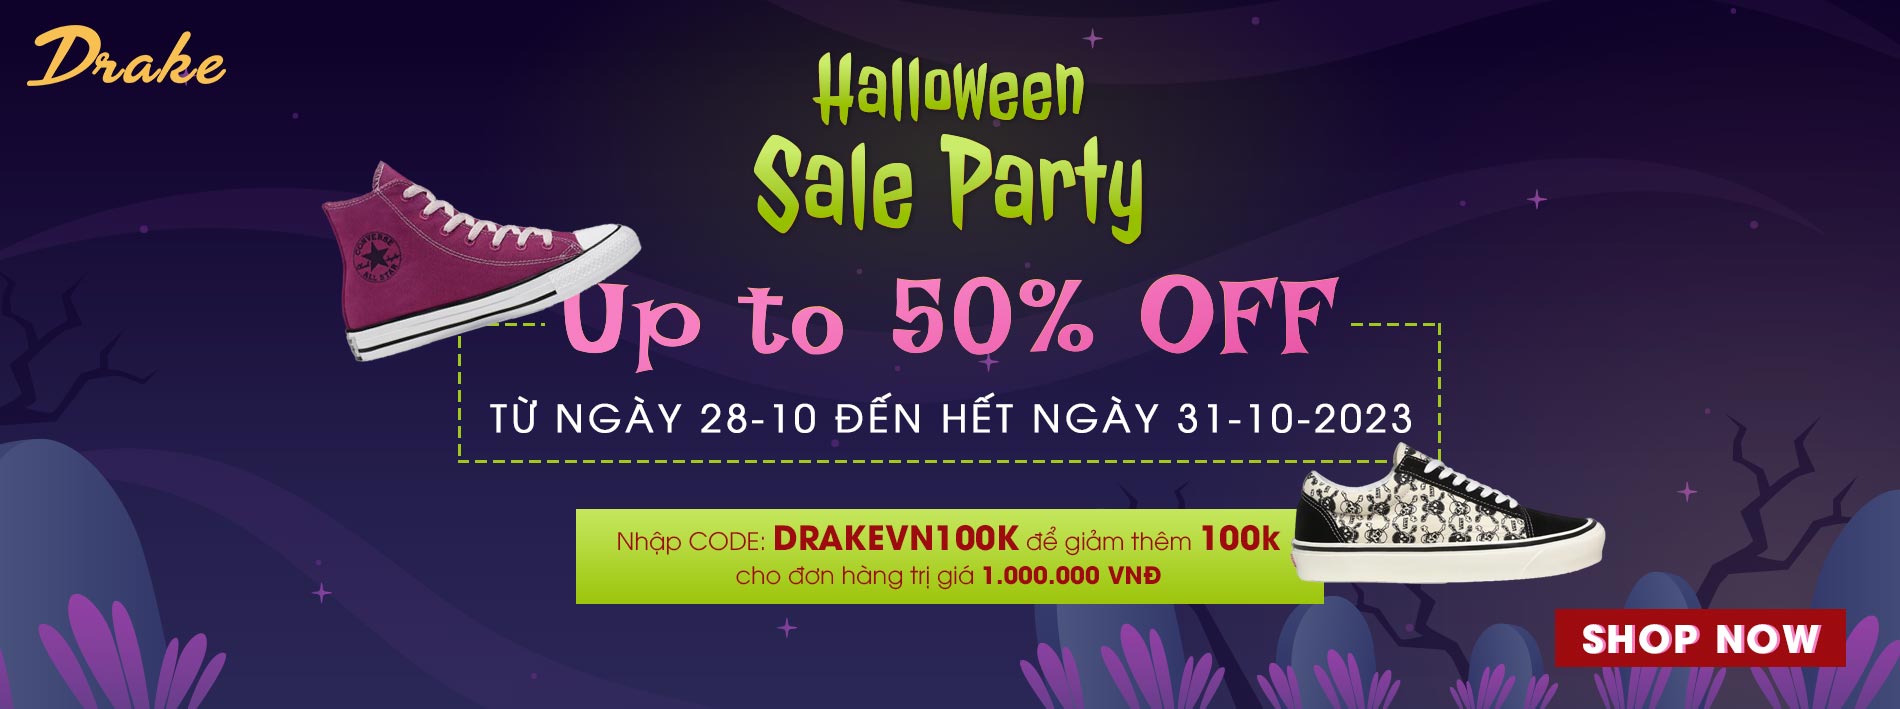 HALLOWEEN SALE PARTY - DRAKE SALE ON TOP - UP TO 50% ALL ITEMS